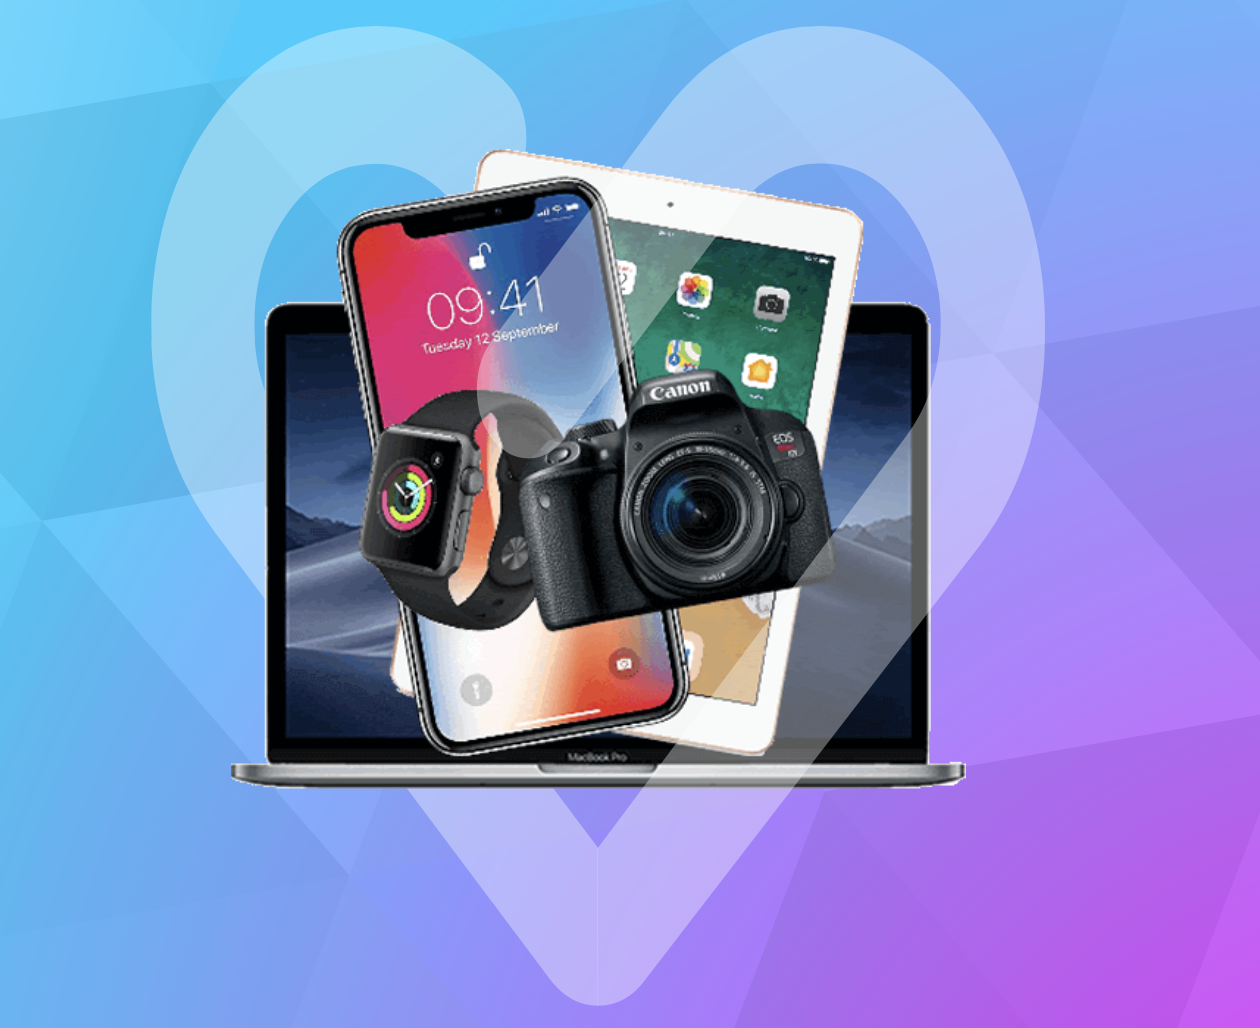 loveit coverit offering insurance for MacBooks and Apple Watches